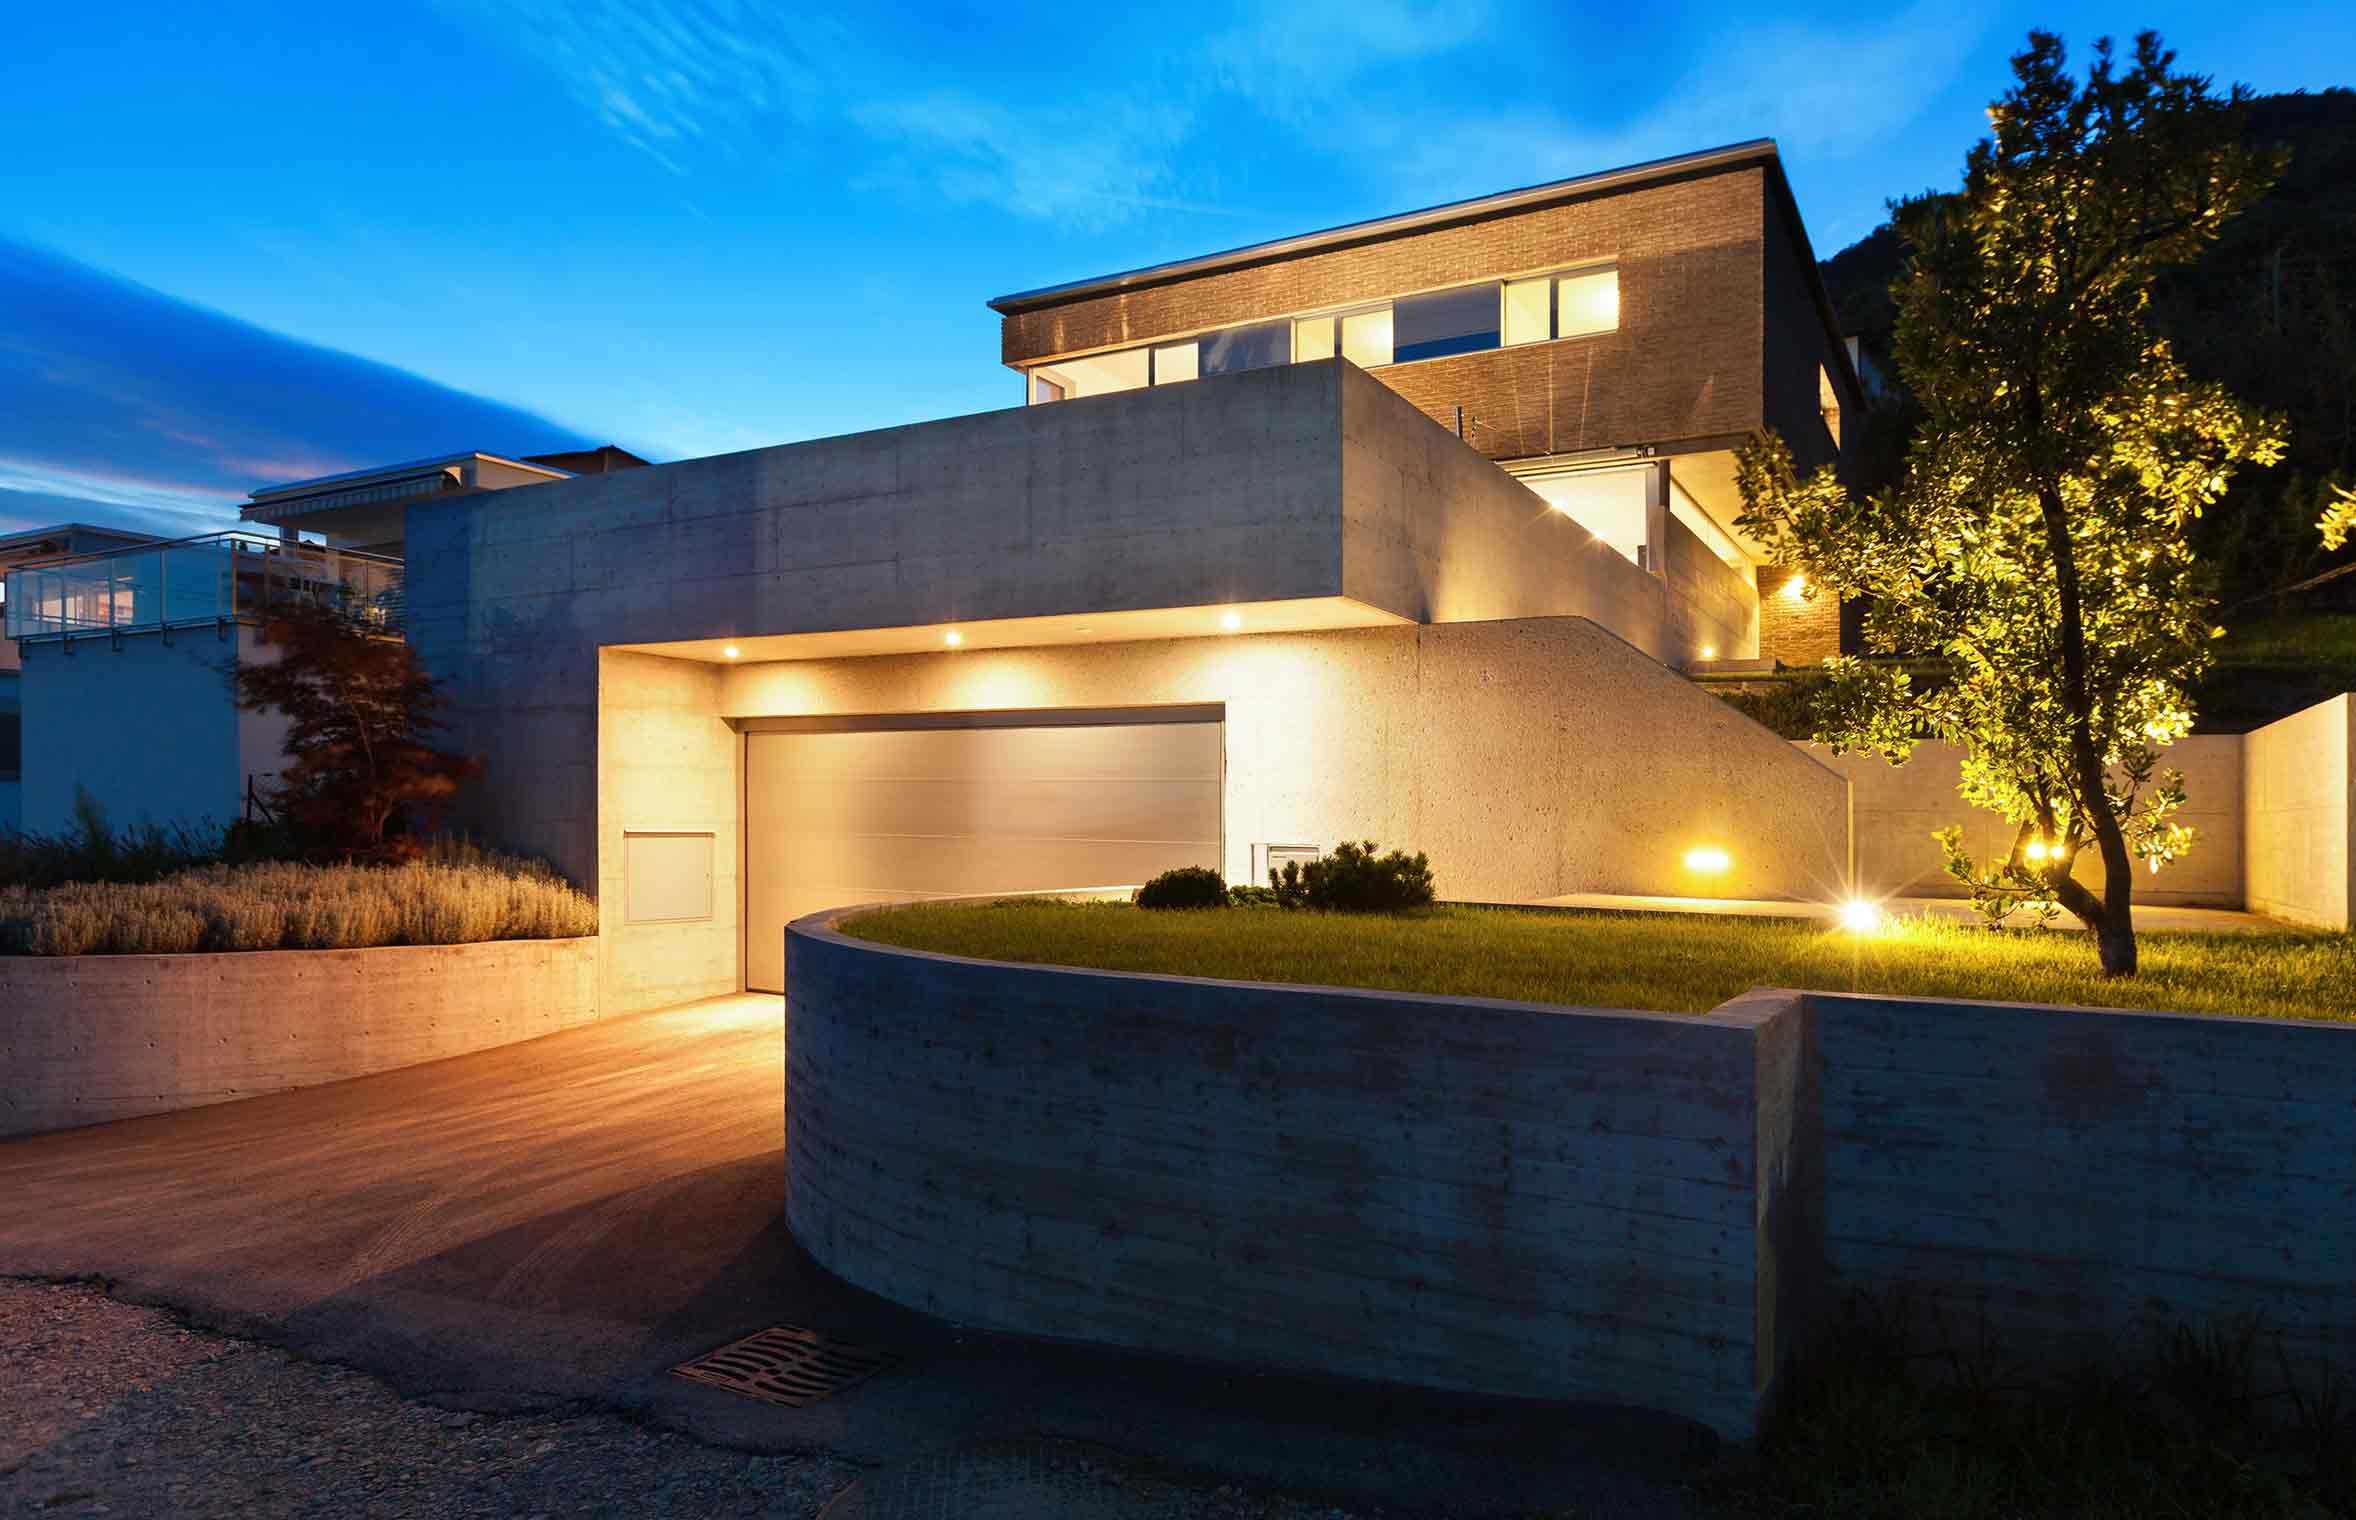 modern home viewed from the street with lighting illuminating the home at night